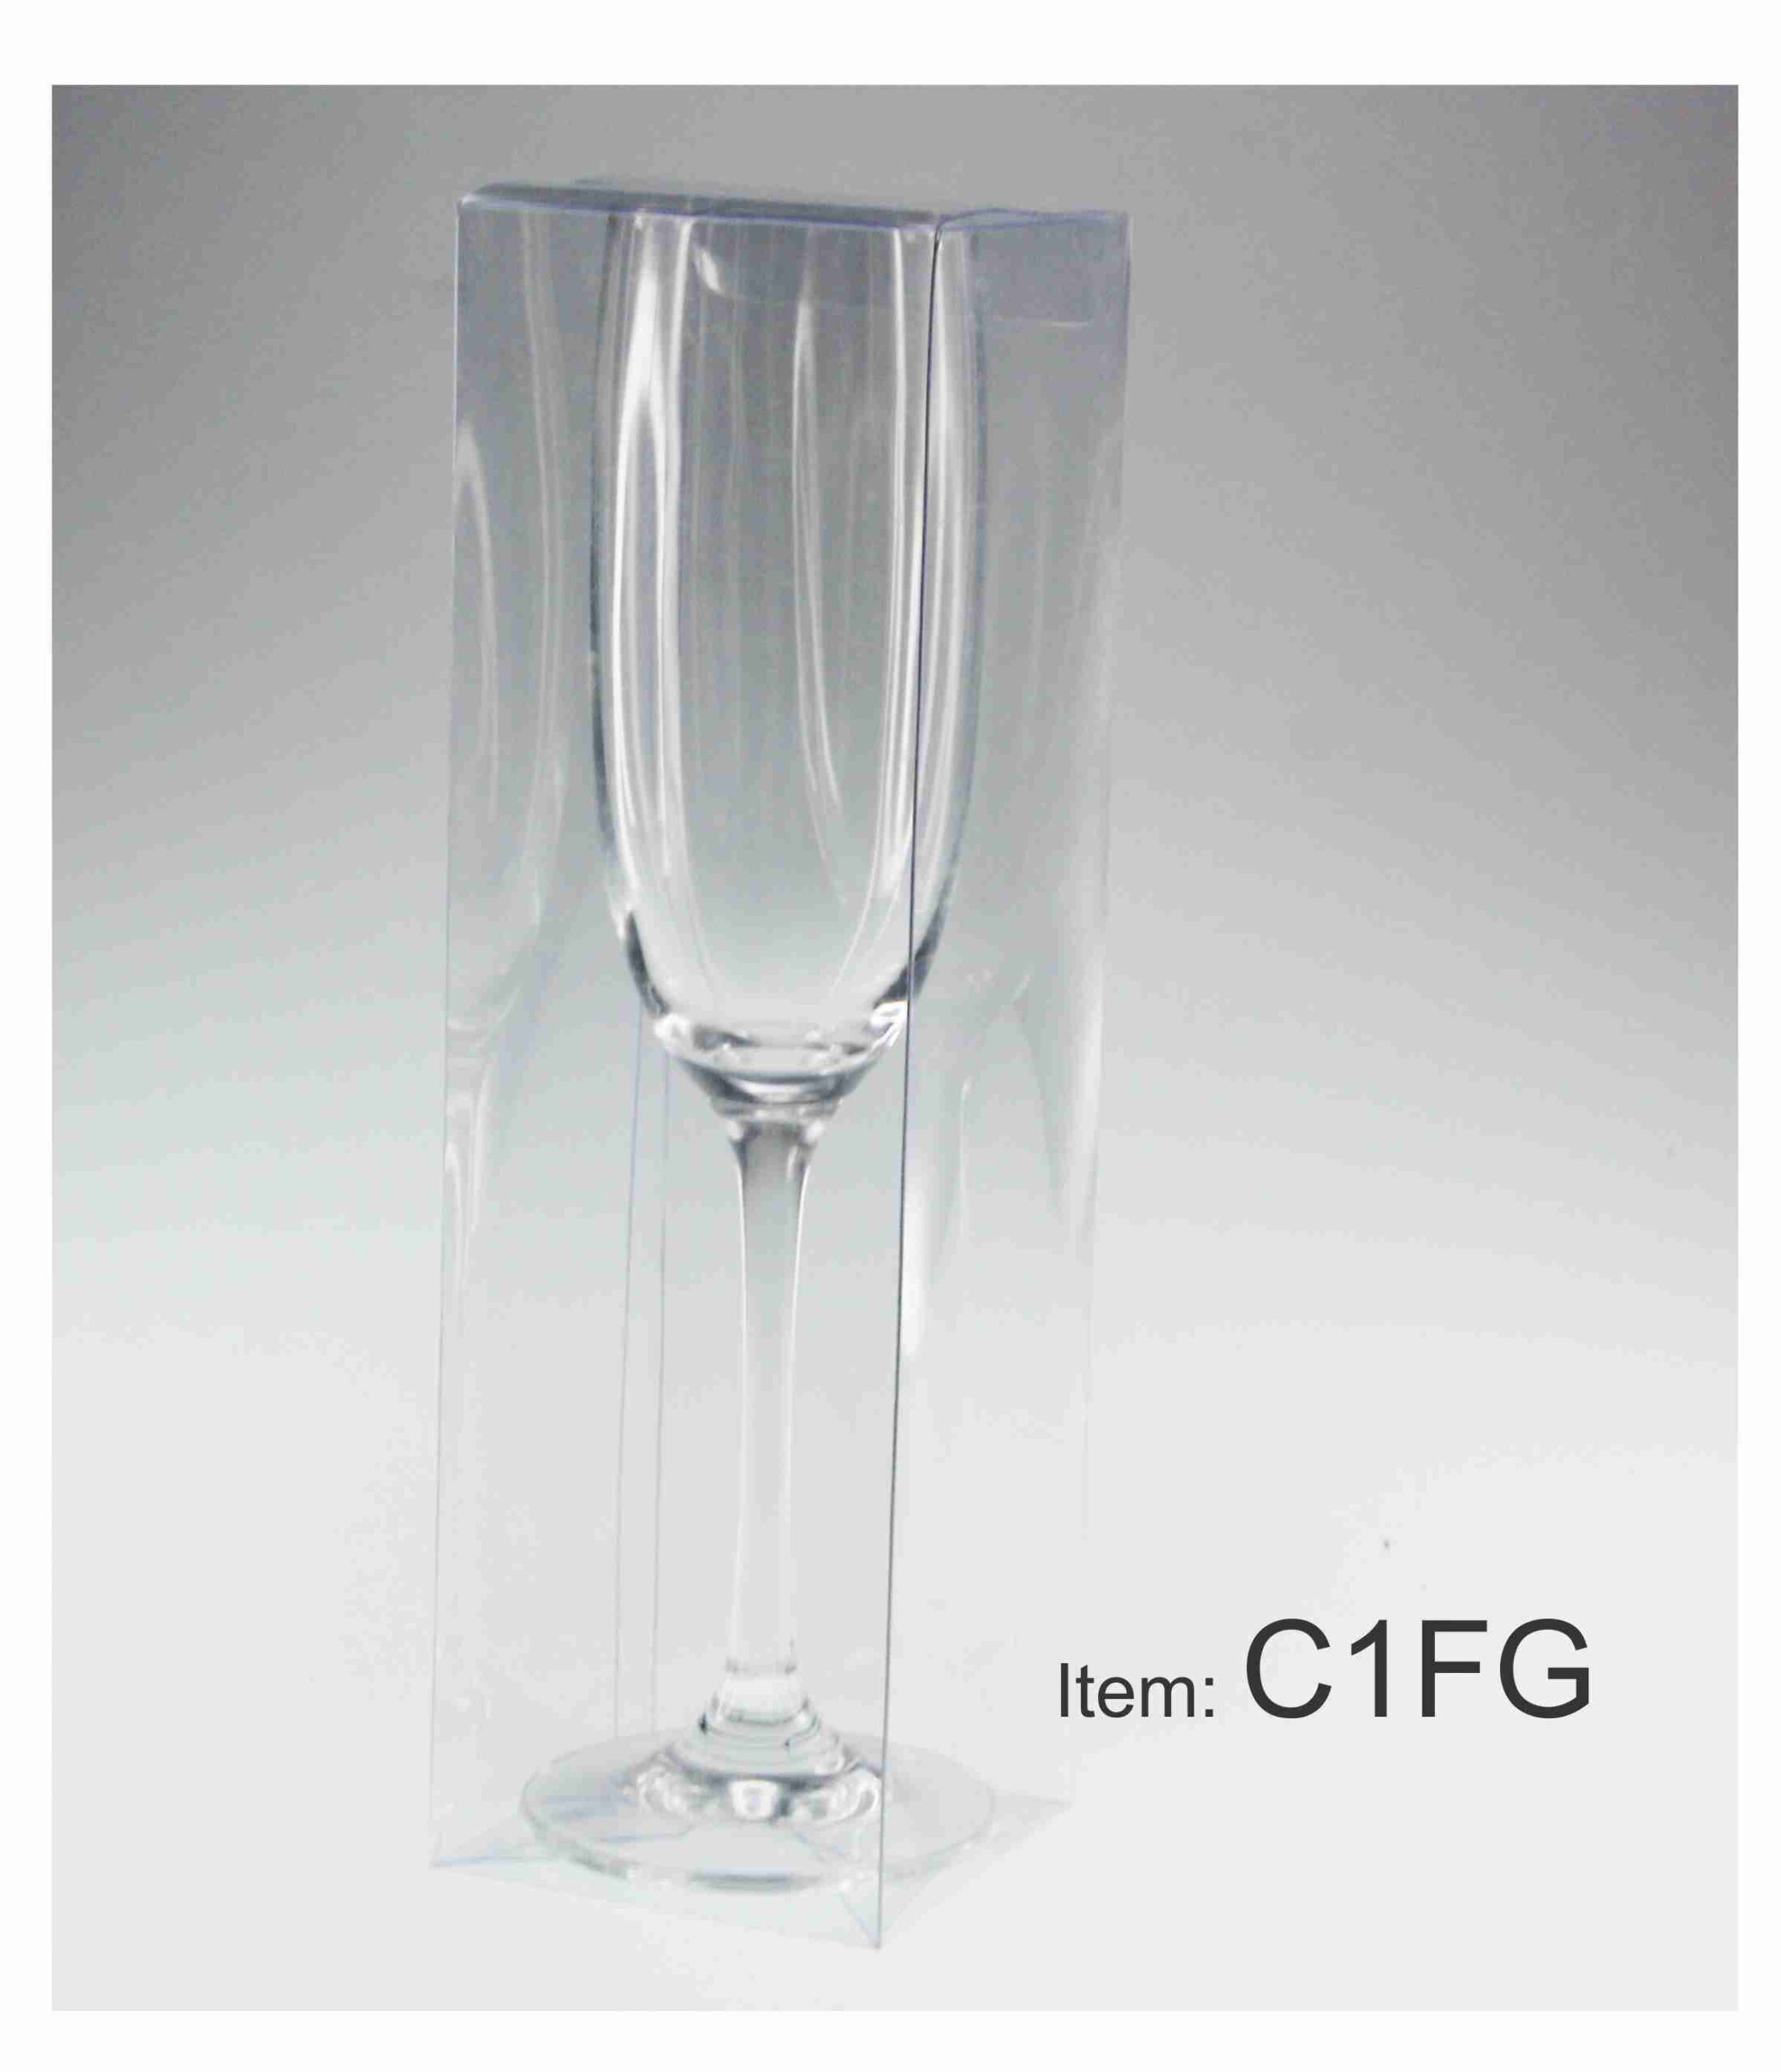 C1FG champagne flute glass clear transparent pvc gift box plastic packaging melbourne abc2000 scaled